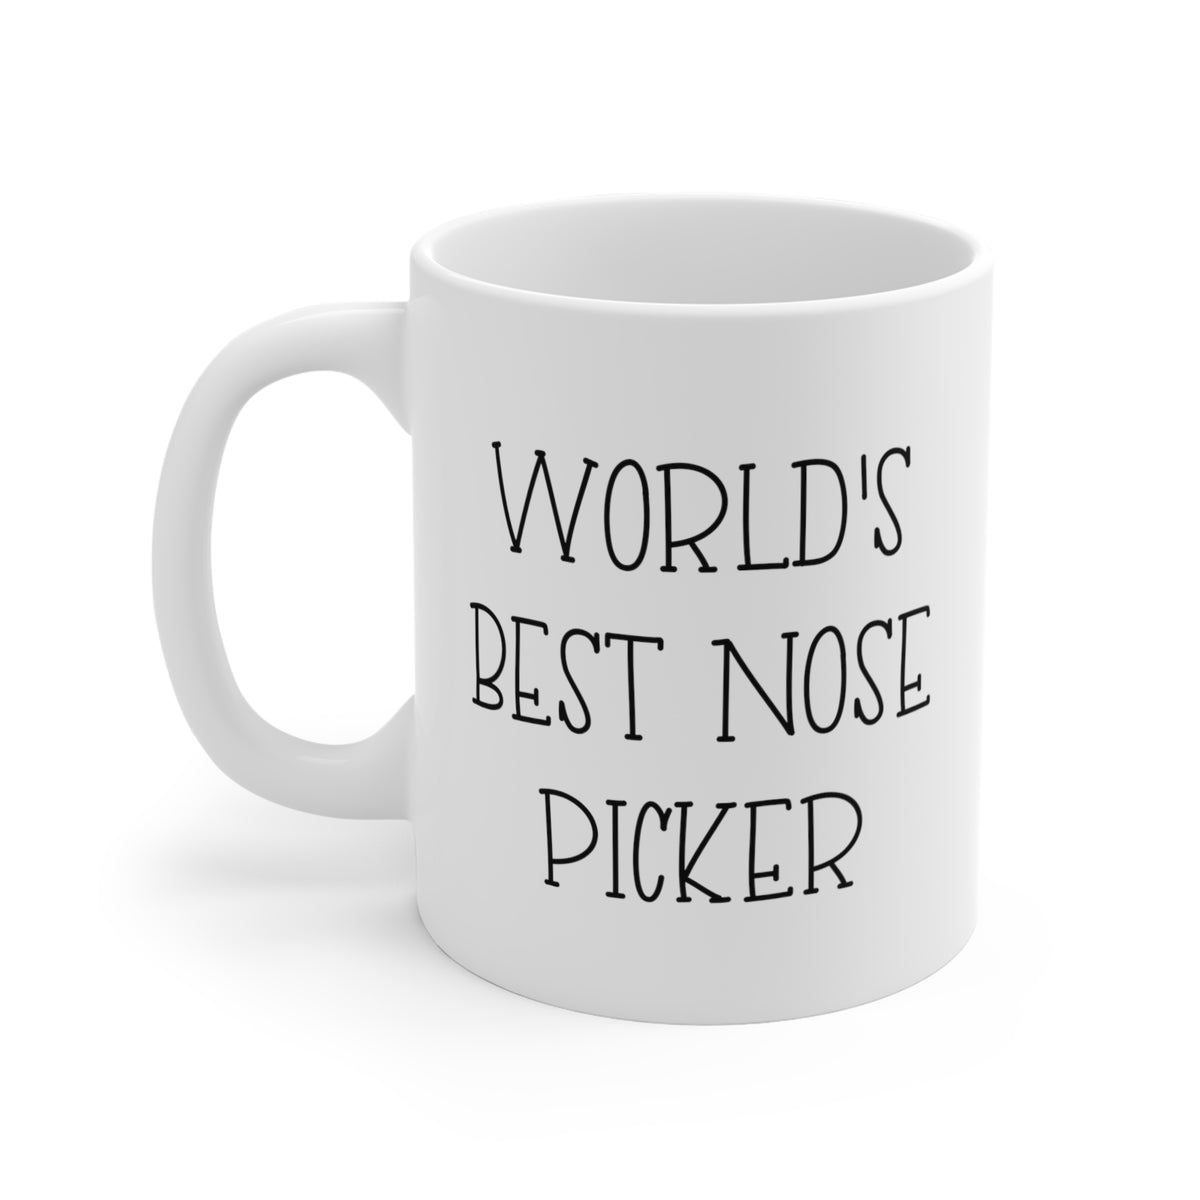 Funny Dad Coffee Mug, World's Best Nose Picker, Father